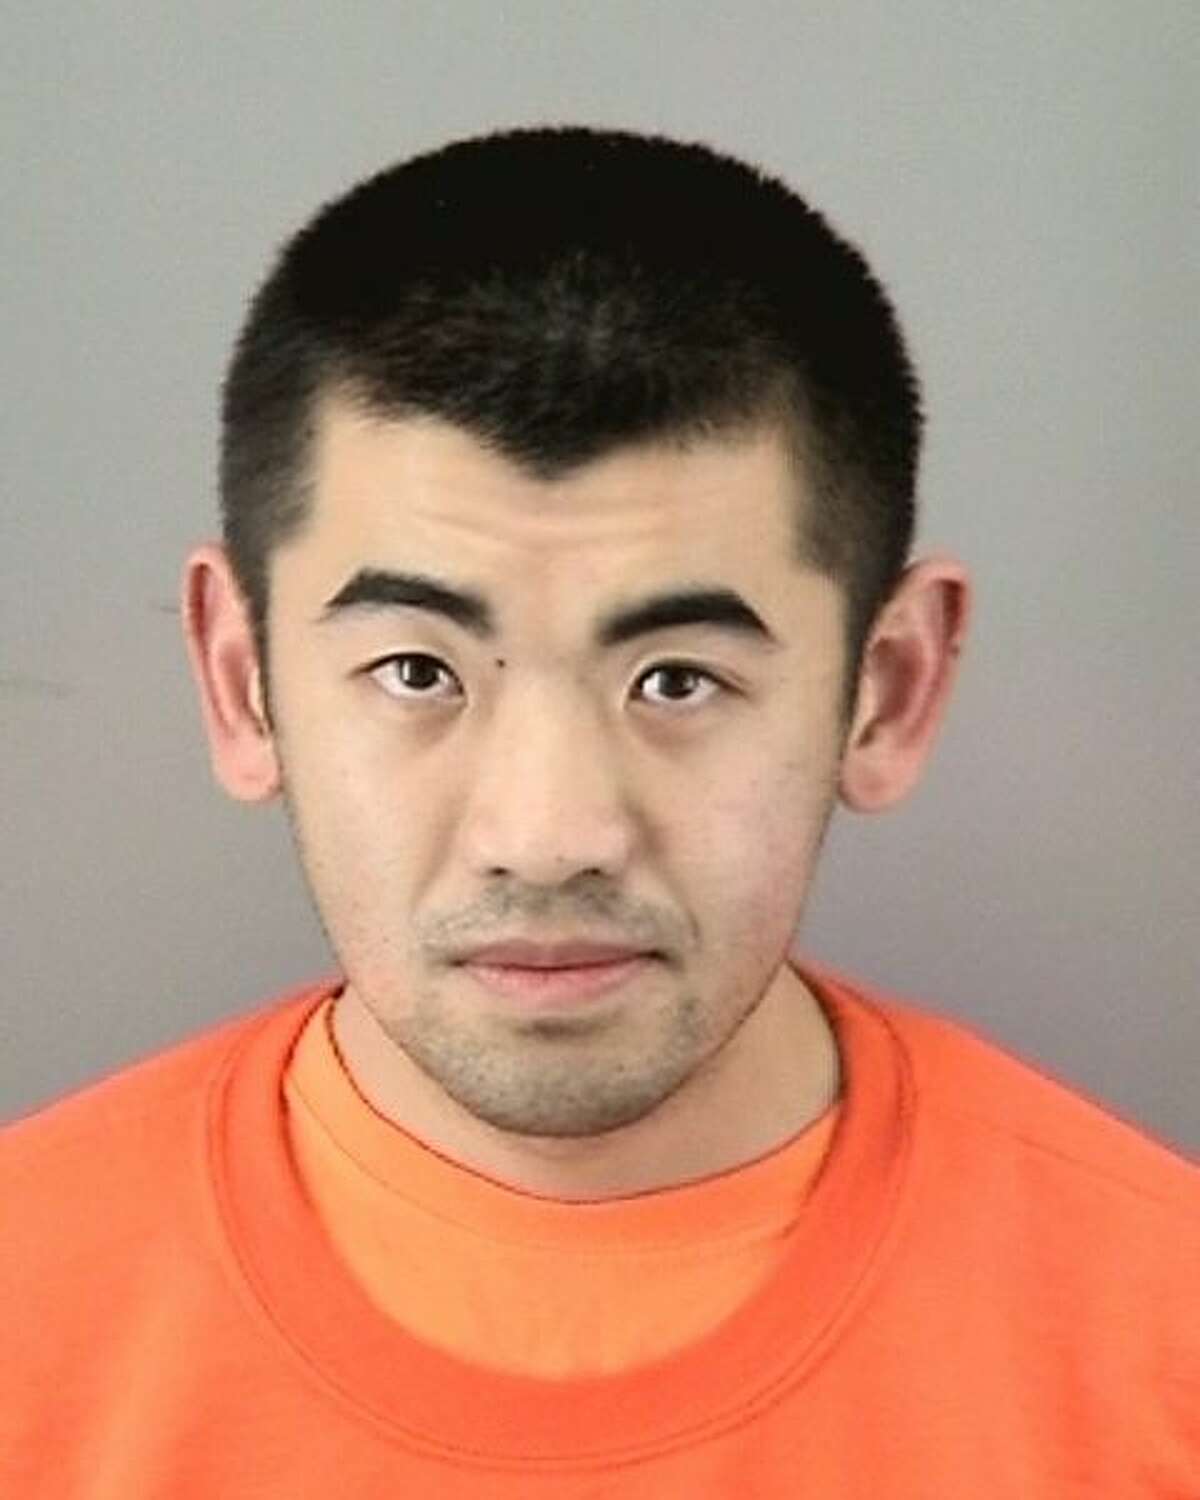 Nicholas Fong, 24, was arrested by San Francisco police on suspicion of possessing child pornography charges.